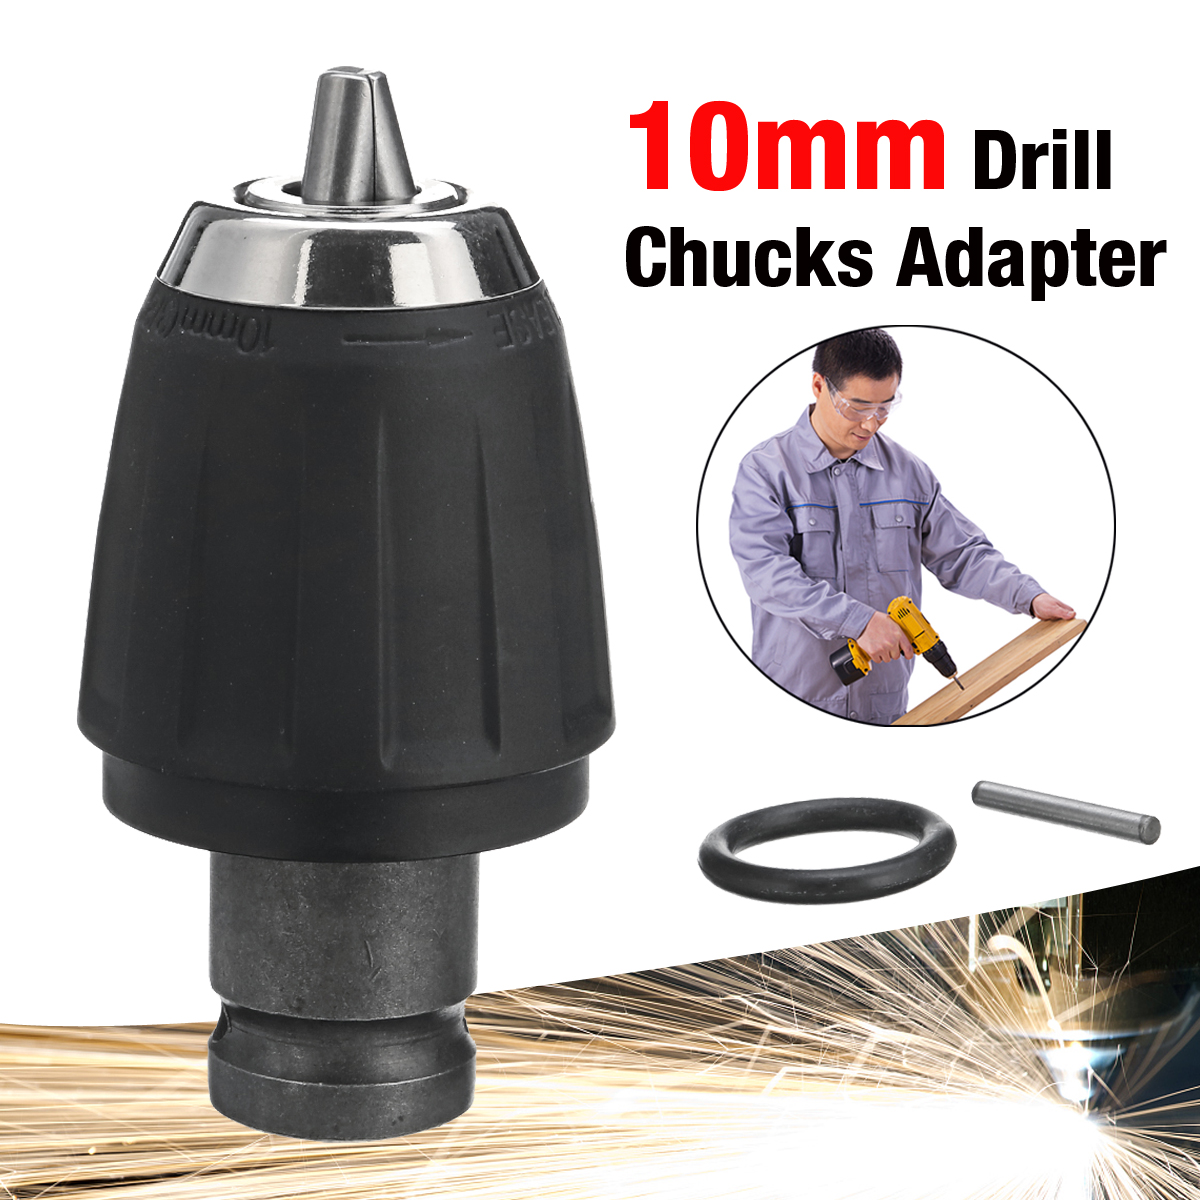 10mm-Drill-Chuck-Adapter-12-Inch-Electric-Wrench-Converter-Keyless-Drill-Chuck-1440144-9